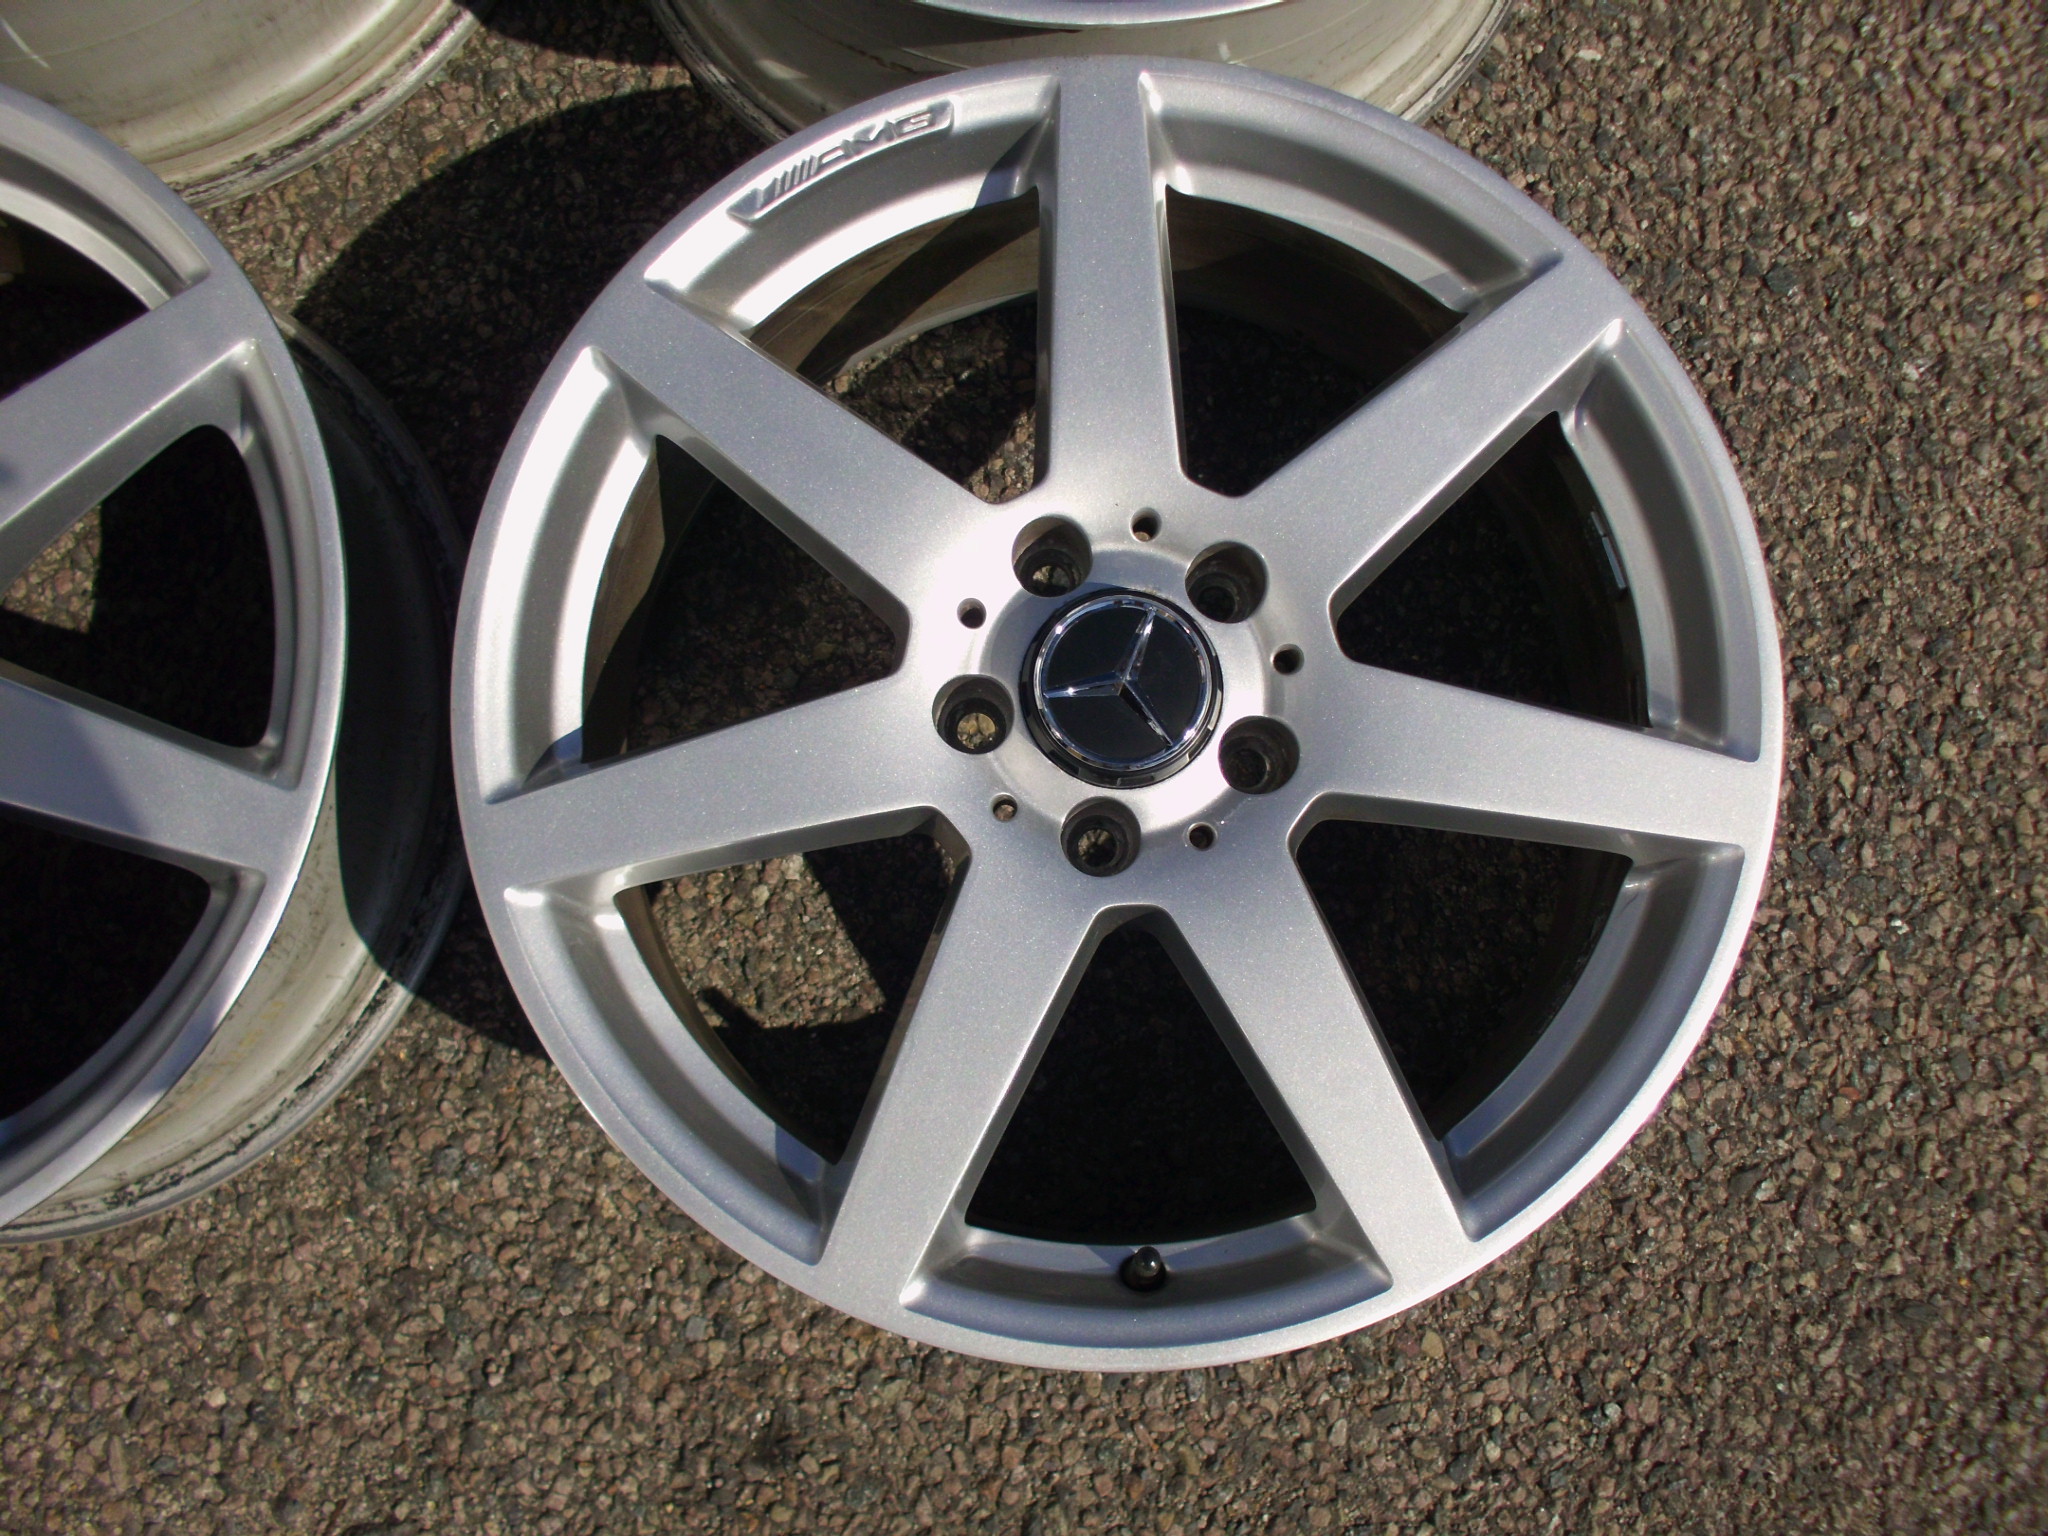 USED 18" GENUINE MERCEDES AMG 7 SPOKE ALLOY WHEELS,VERY GOOD CONDITION ,WIDER REARS